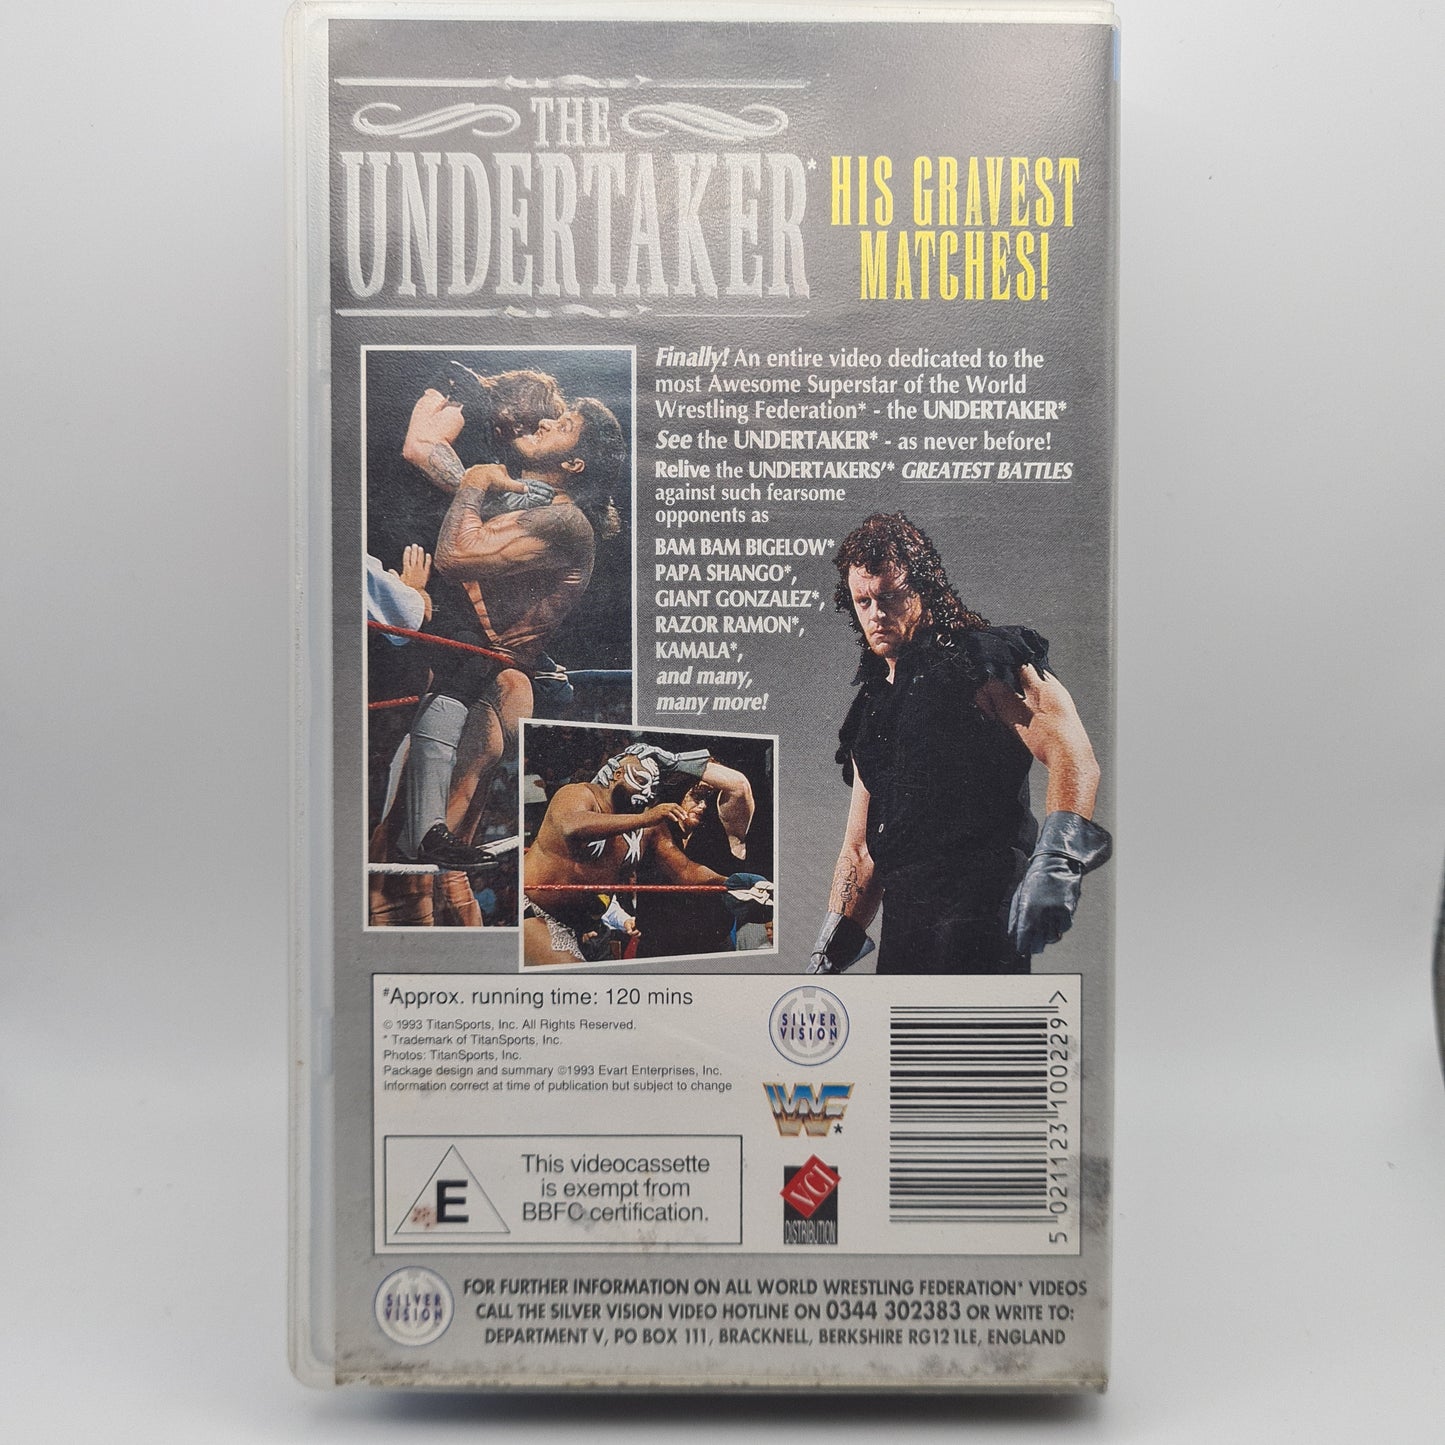 The Undertaker Gravest Matches VHS